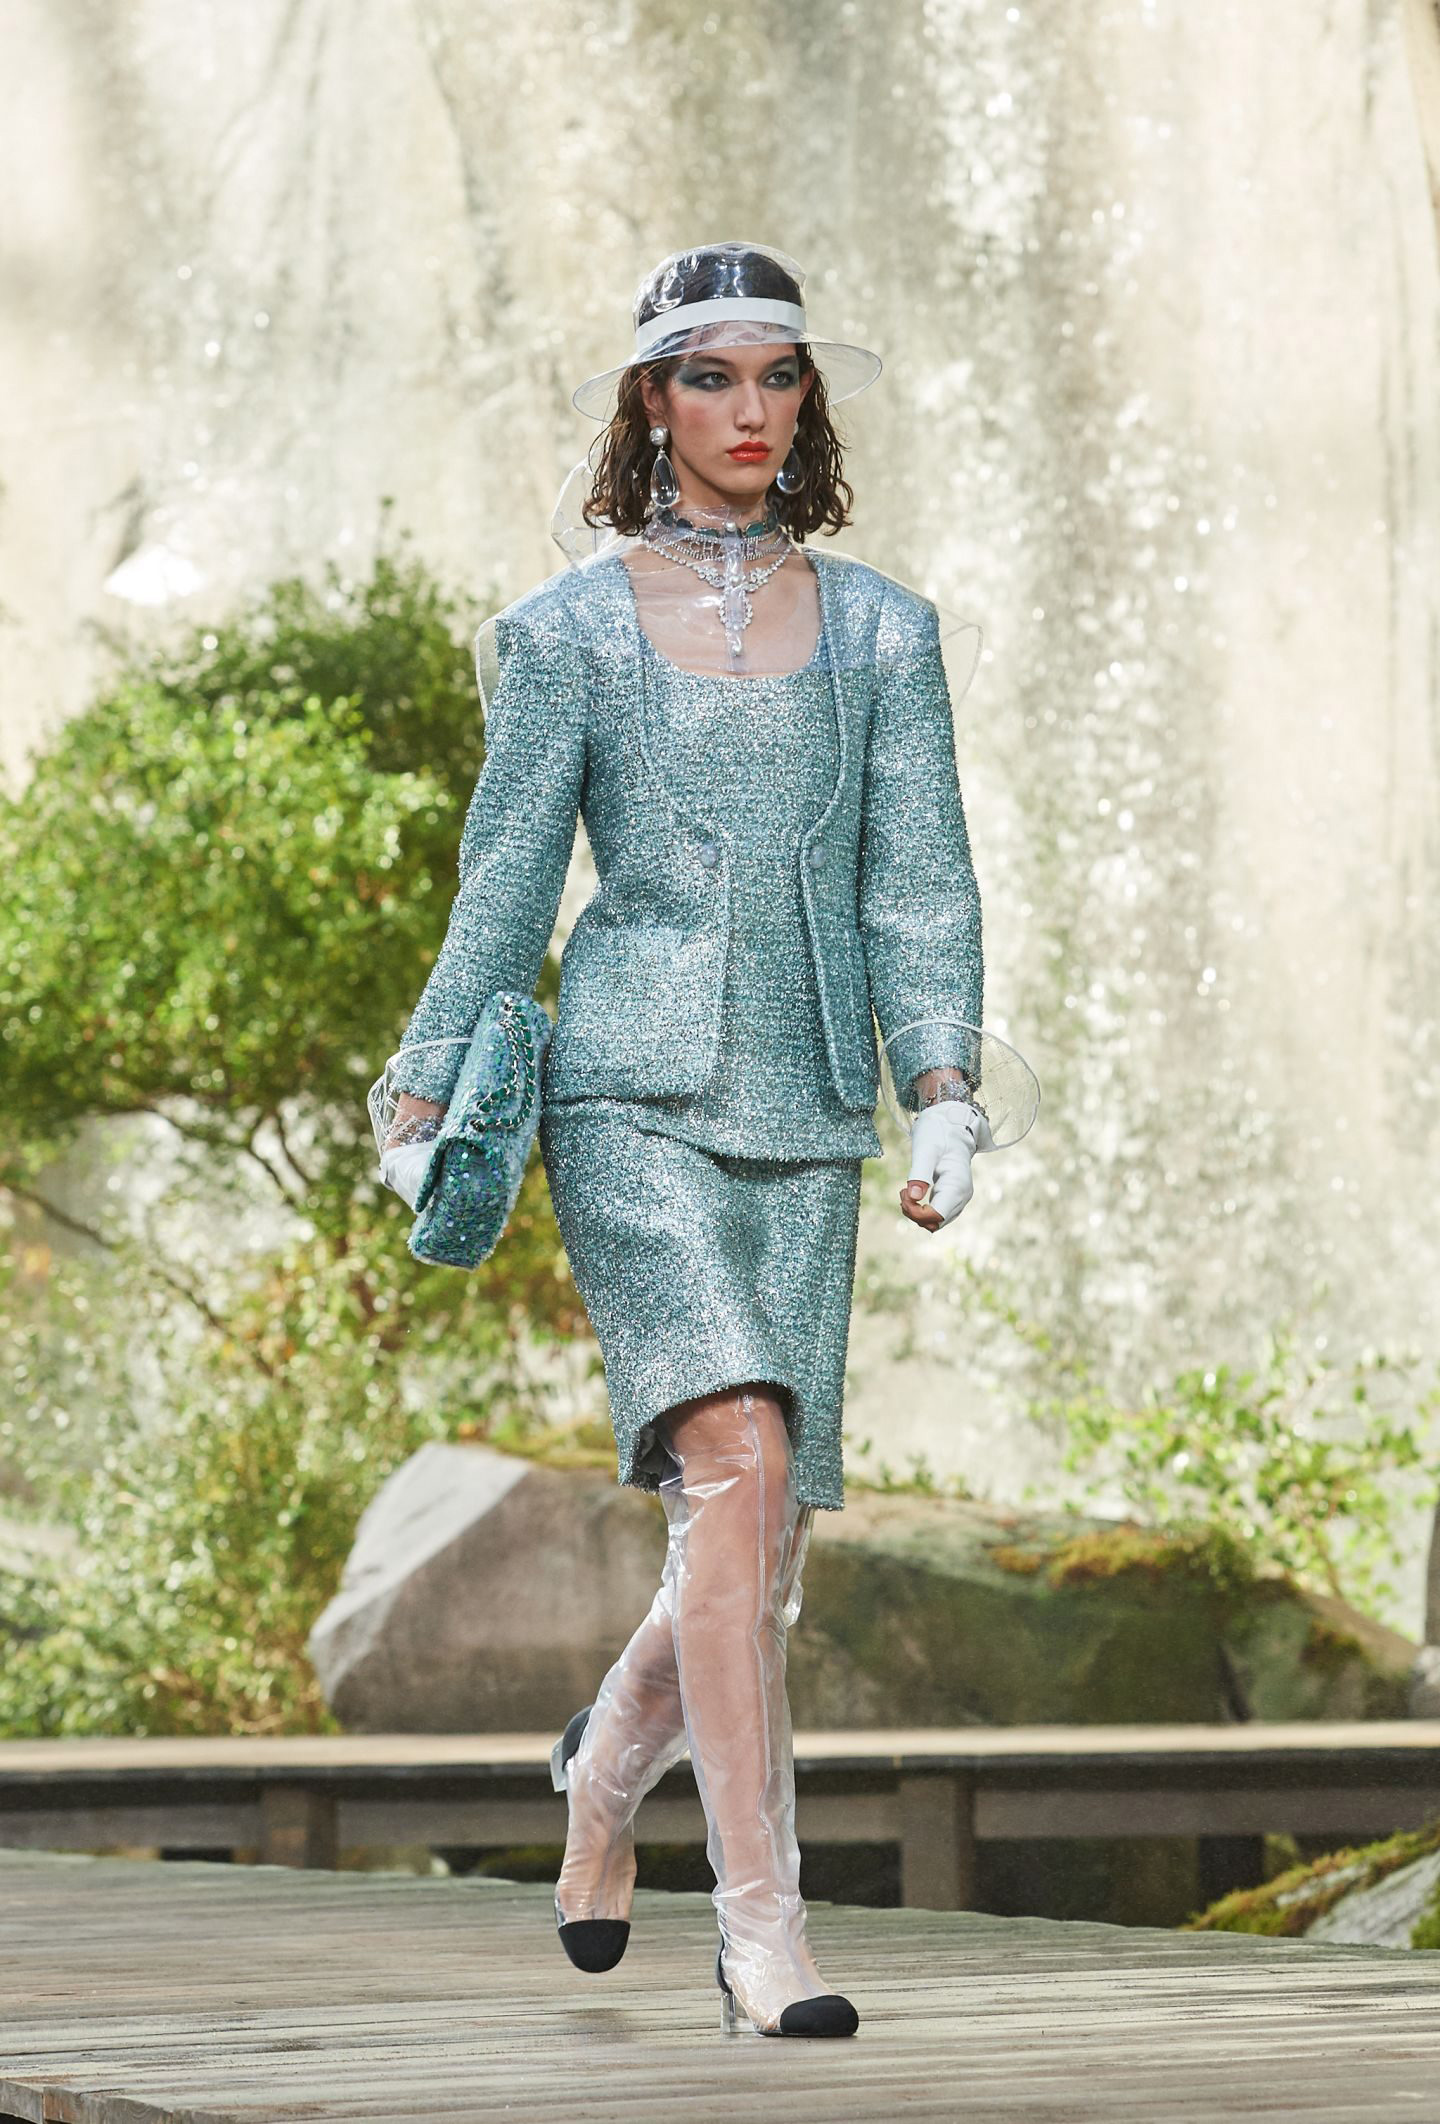 Chanel Spring/Summer 2018 Ready-to-Wear Collection - Fashion Trendsetter